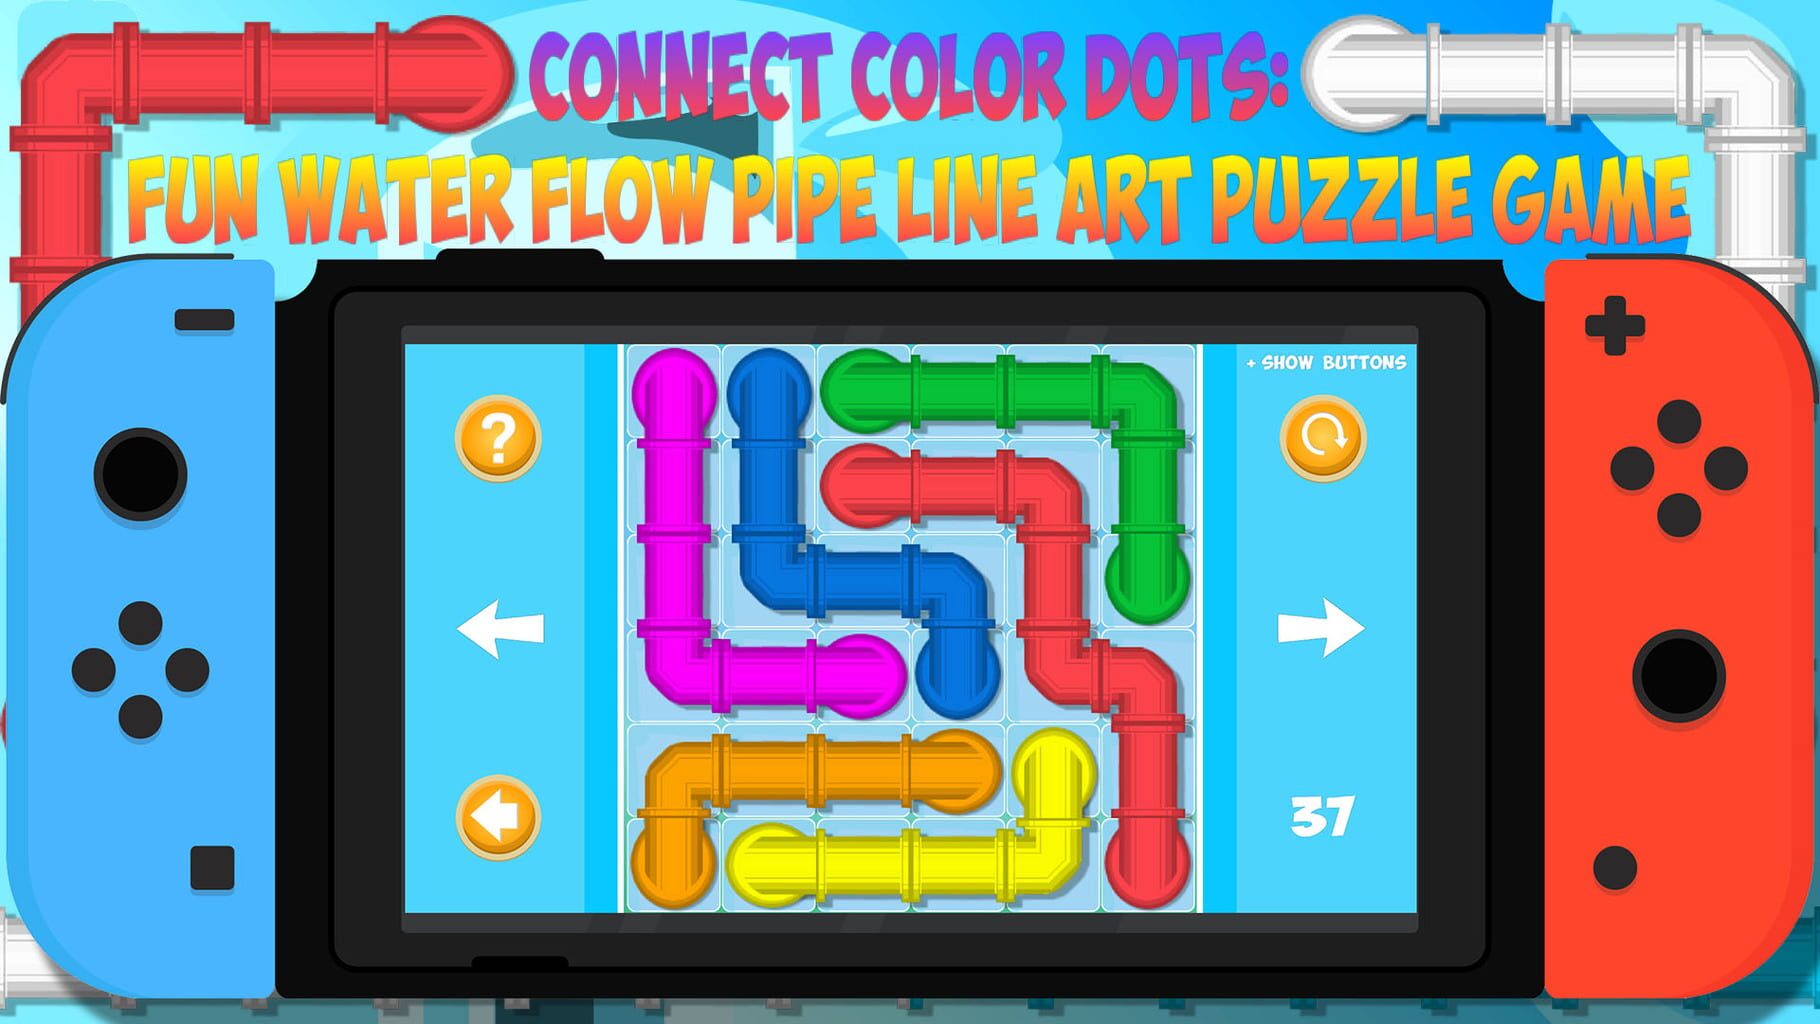 Connect Color Dots: Fun Water Flow Pipe Line Art Puzzle Game artwork